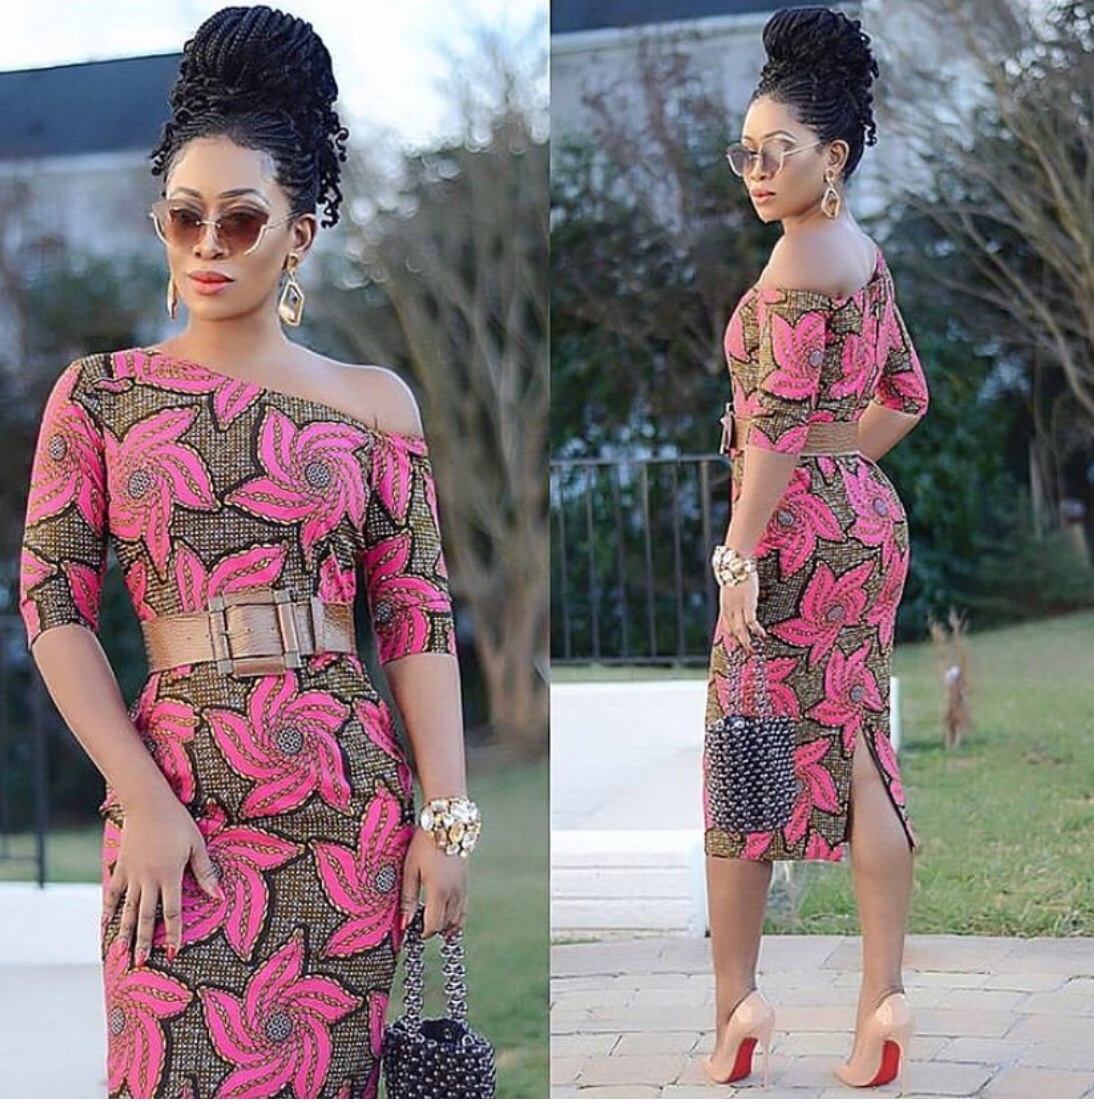 15 Gorgeous Ankara Dress Styles To Step Out In - The Glossychic